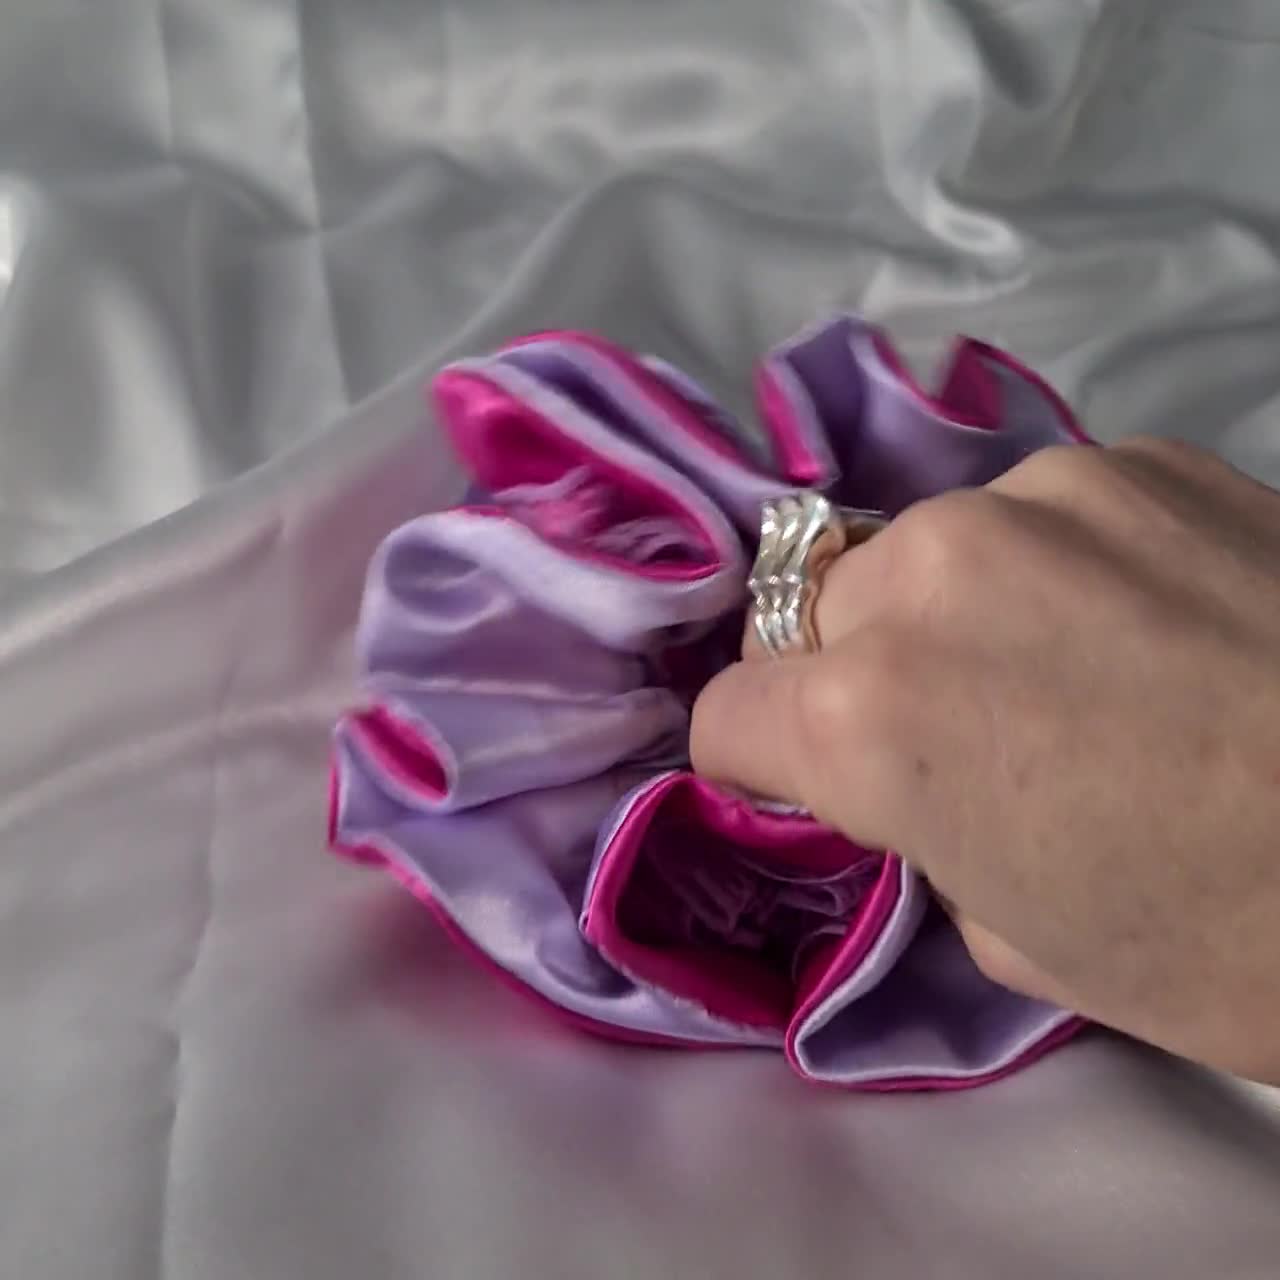 Luxury prissy cock cover Satin bondage Lilac satin sissy pouch Fits over a chastity device